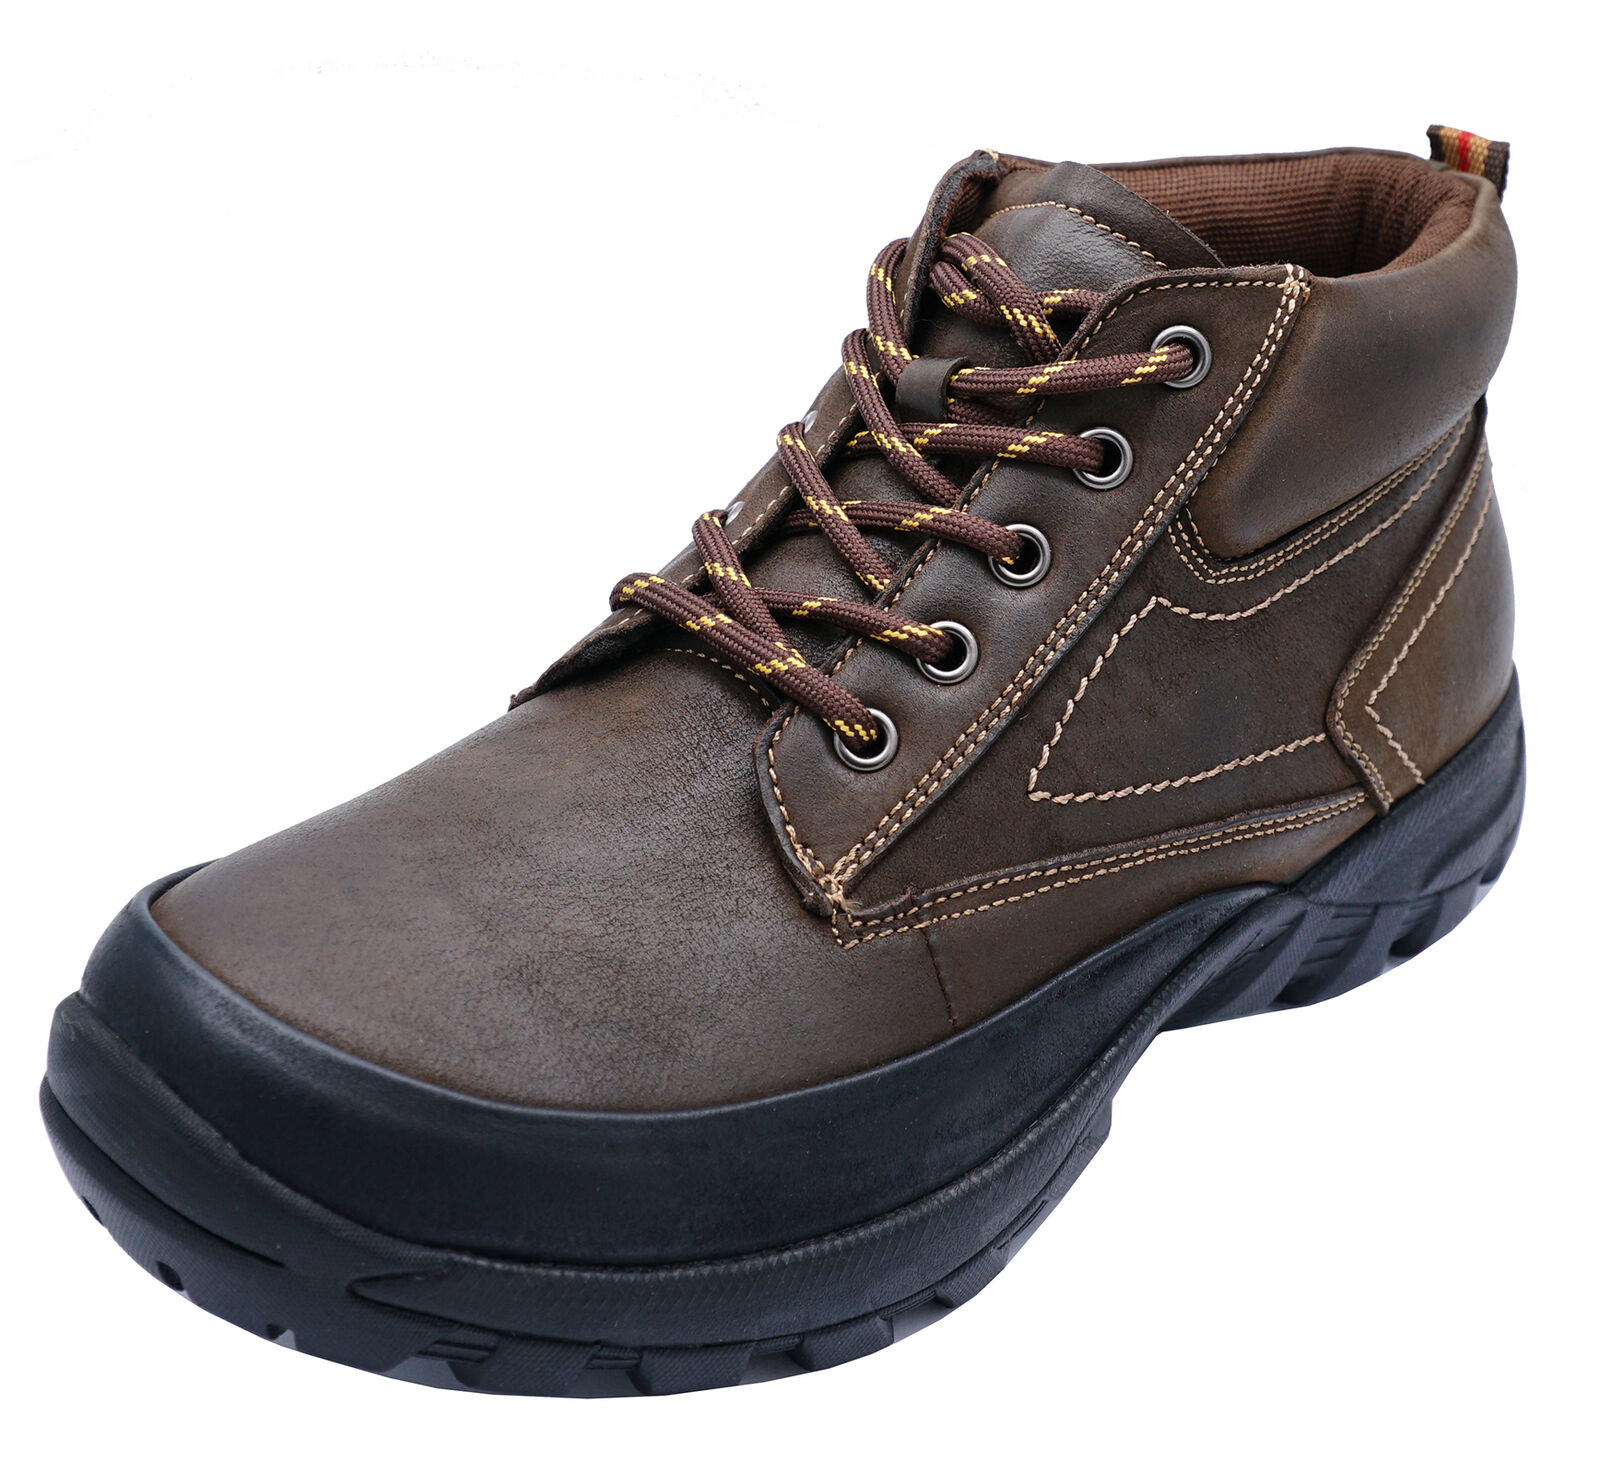 MENS BROWN LEATHER COTSWOLD LACE-UP HIKING TRAIL ANKLE BOOTS SHOES ...